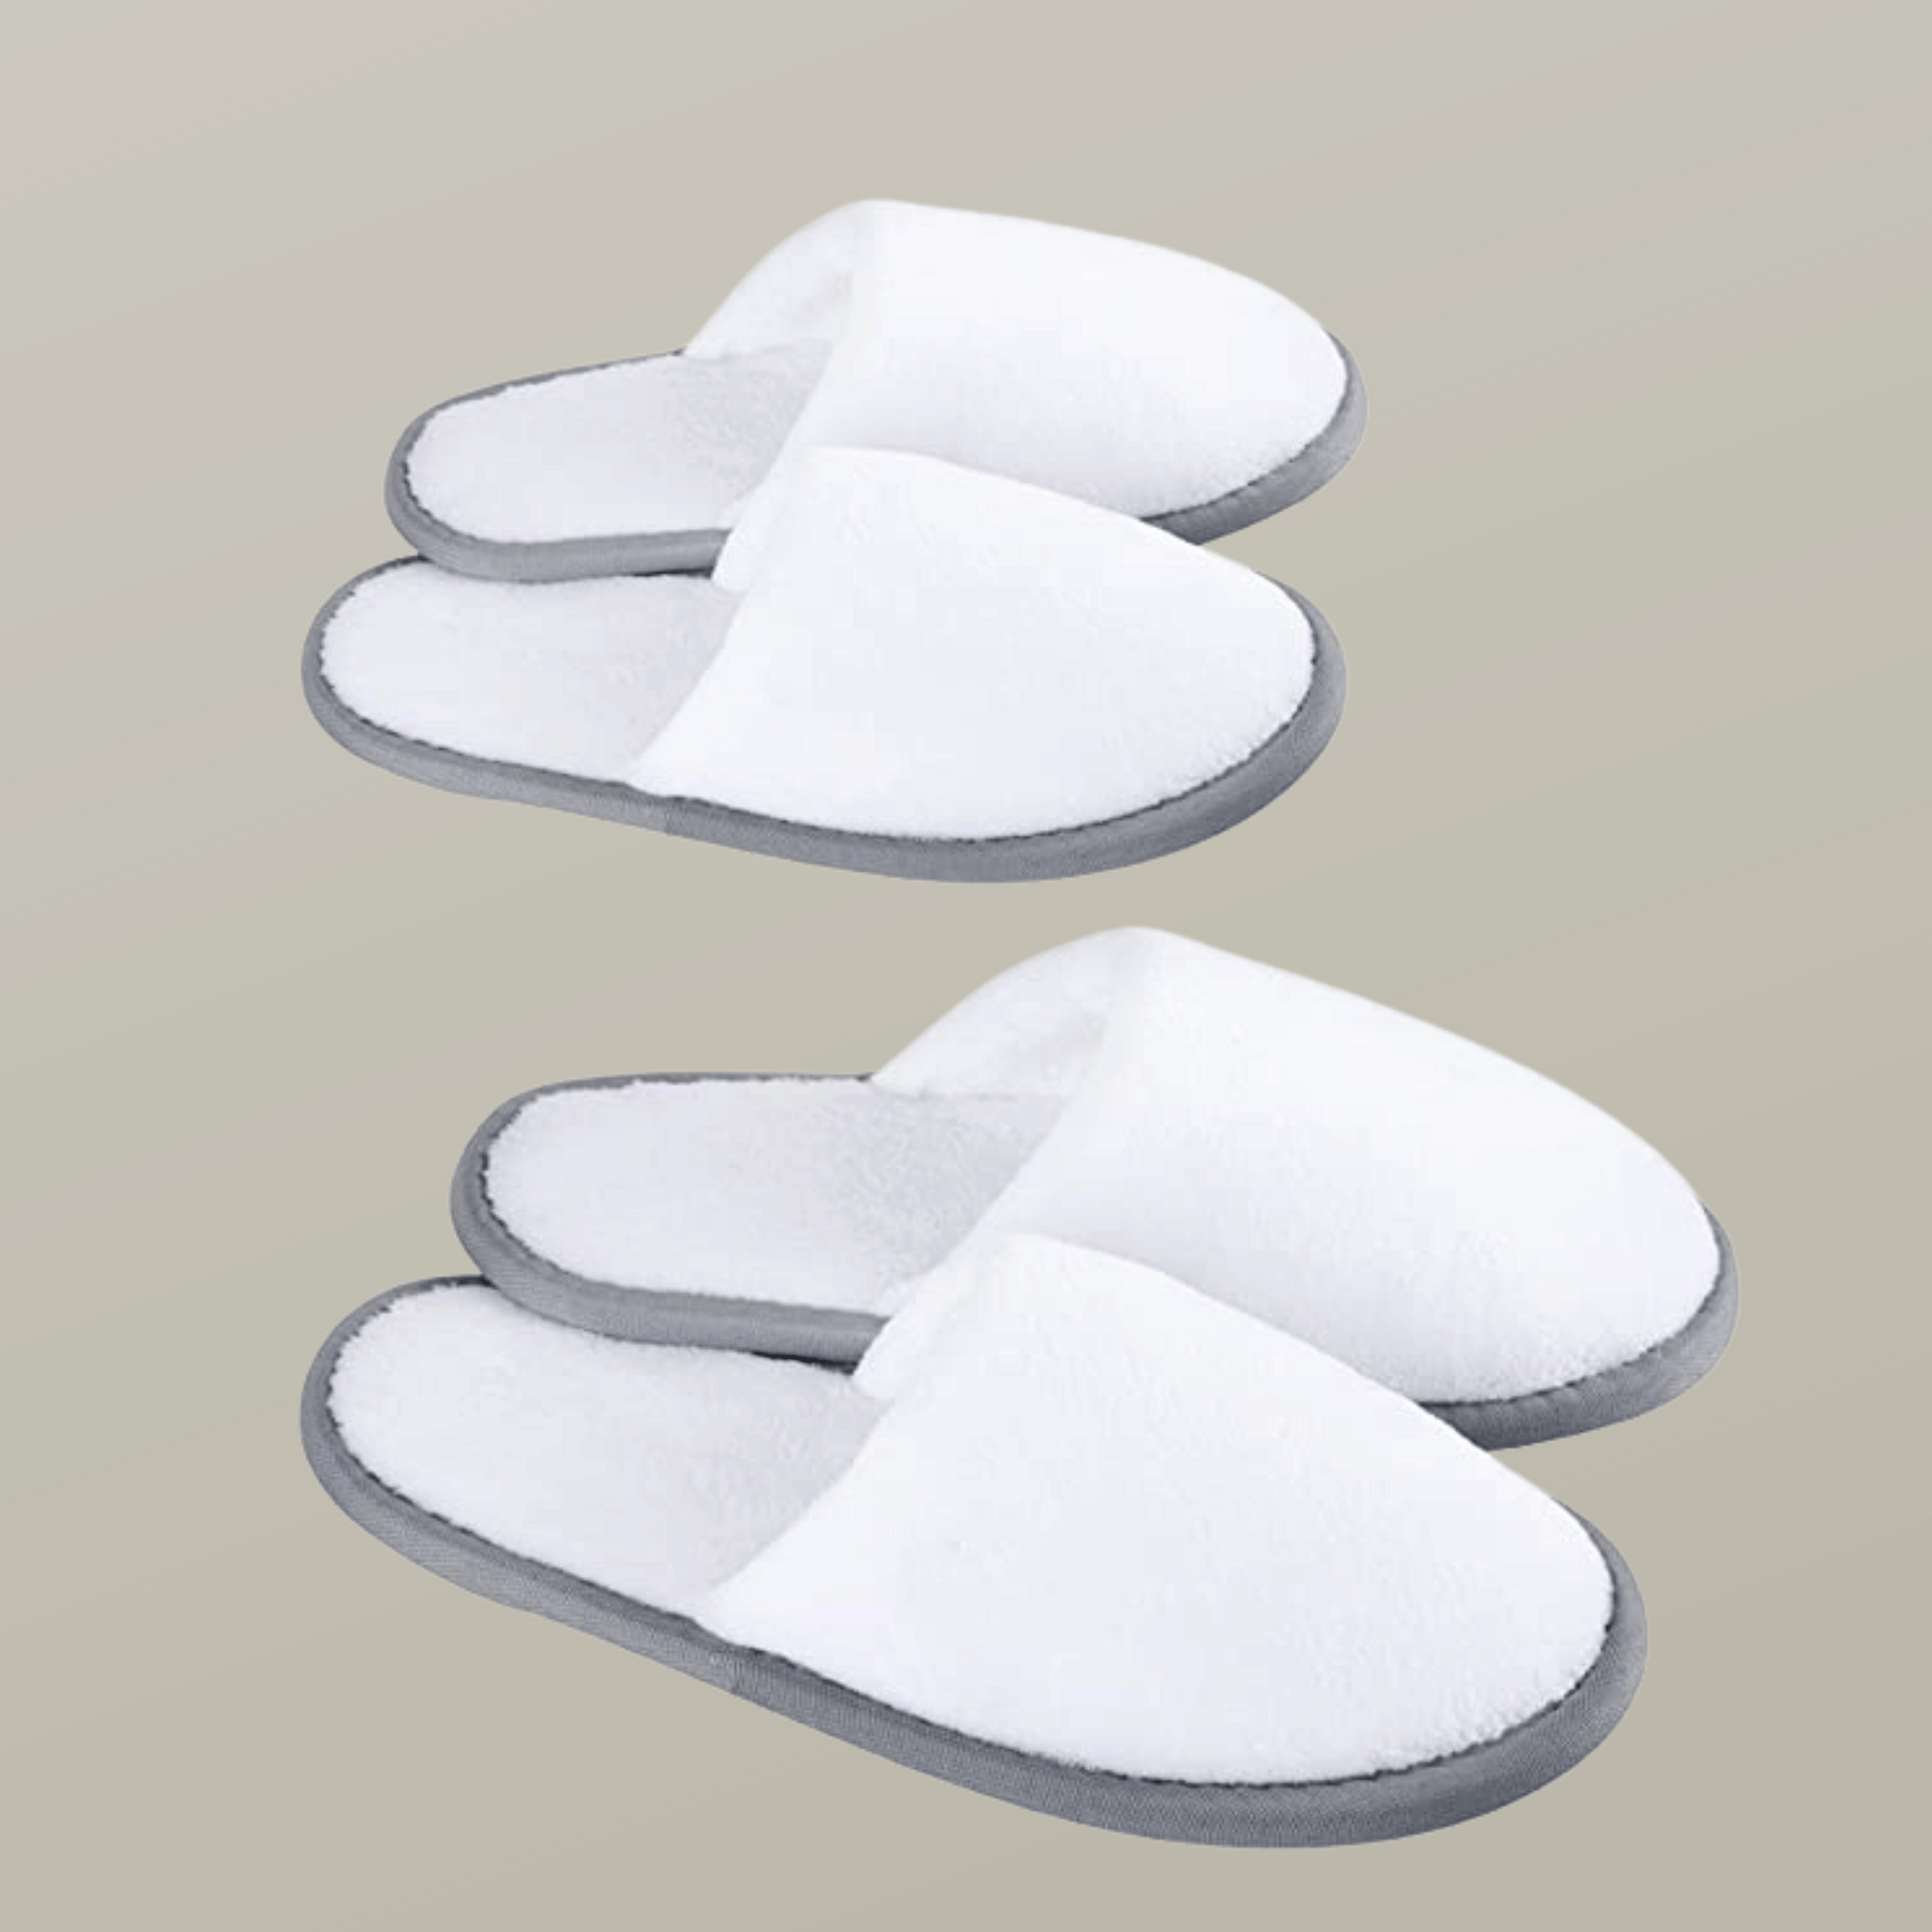 Cozy Spa Slippers